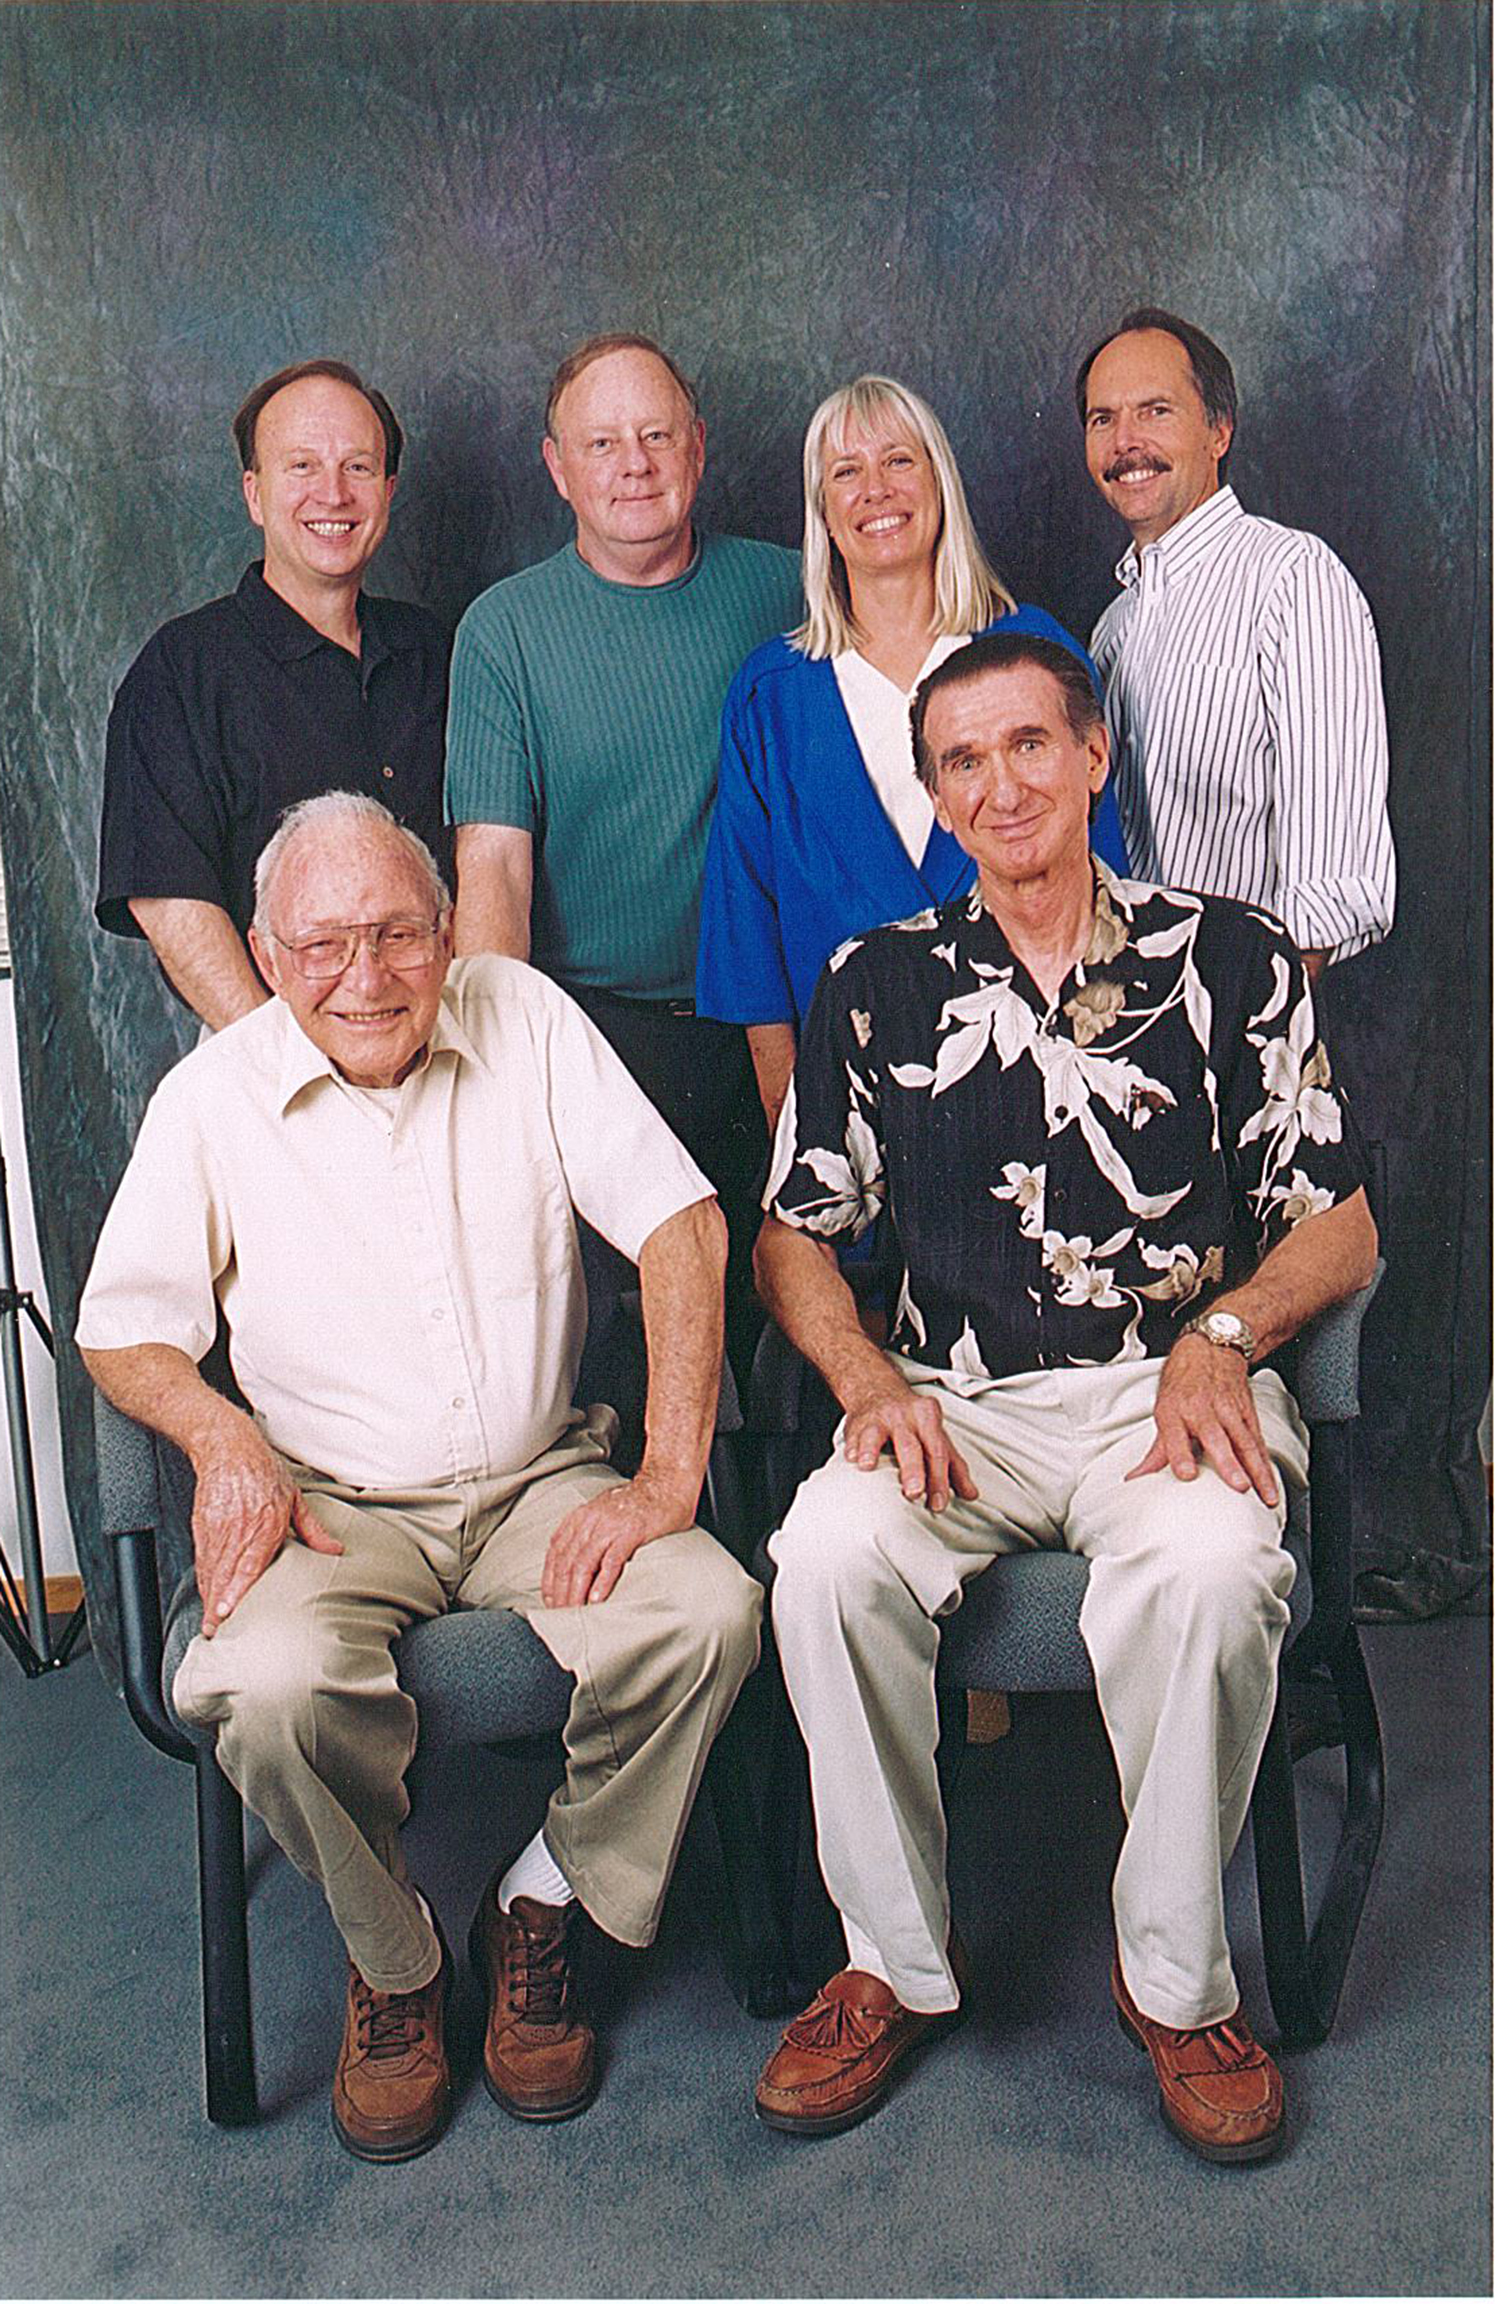 Frank Drexel and Dick Settergren attend DBC 2004 Open House